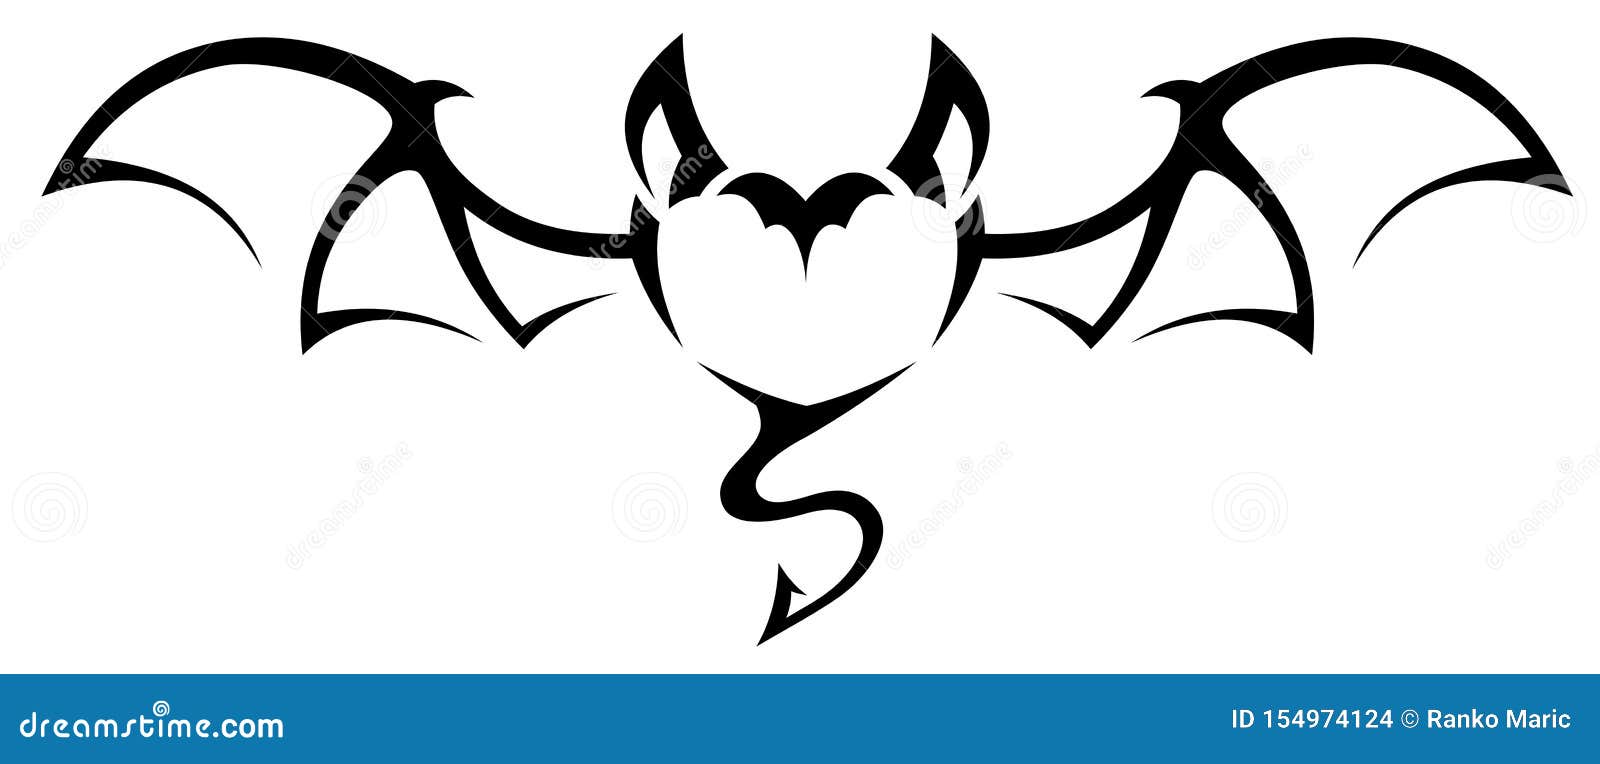 Tribal Tattoo Black and White Heart Shaped Bat Stock Vector - Illustration  of shape, graphic: 154974124